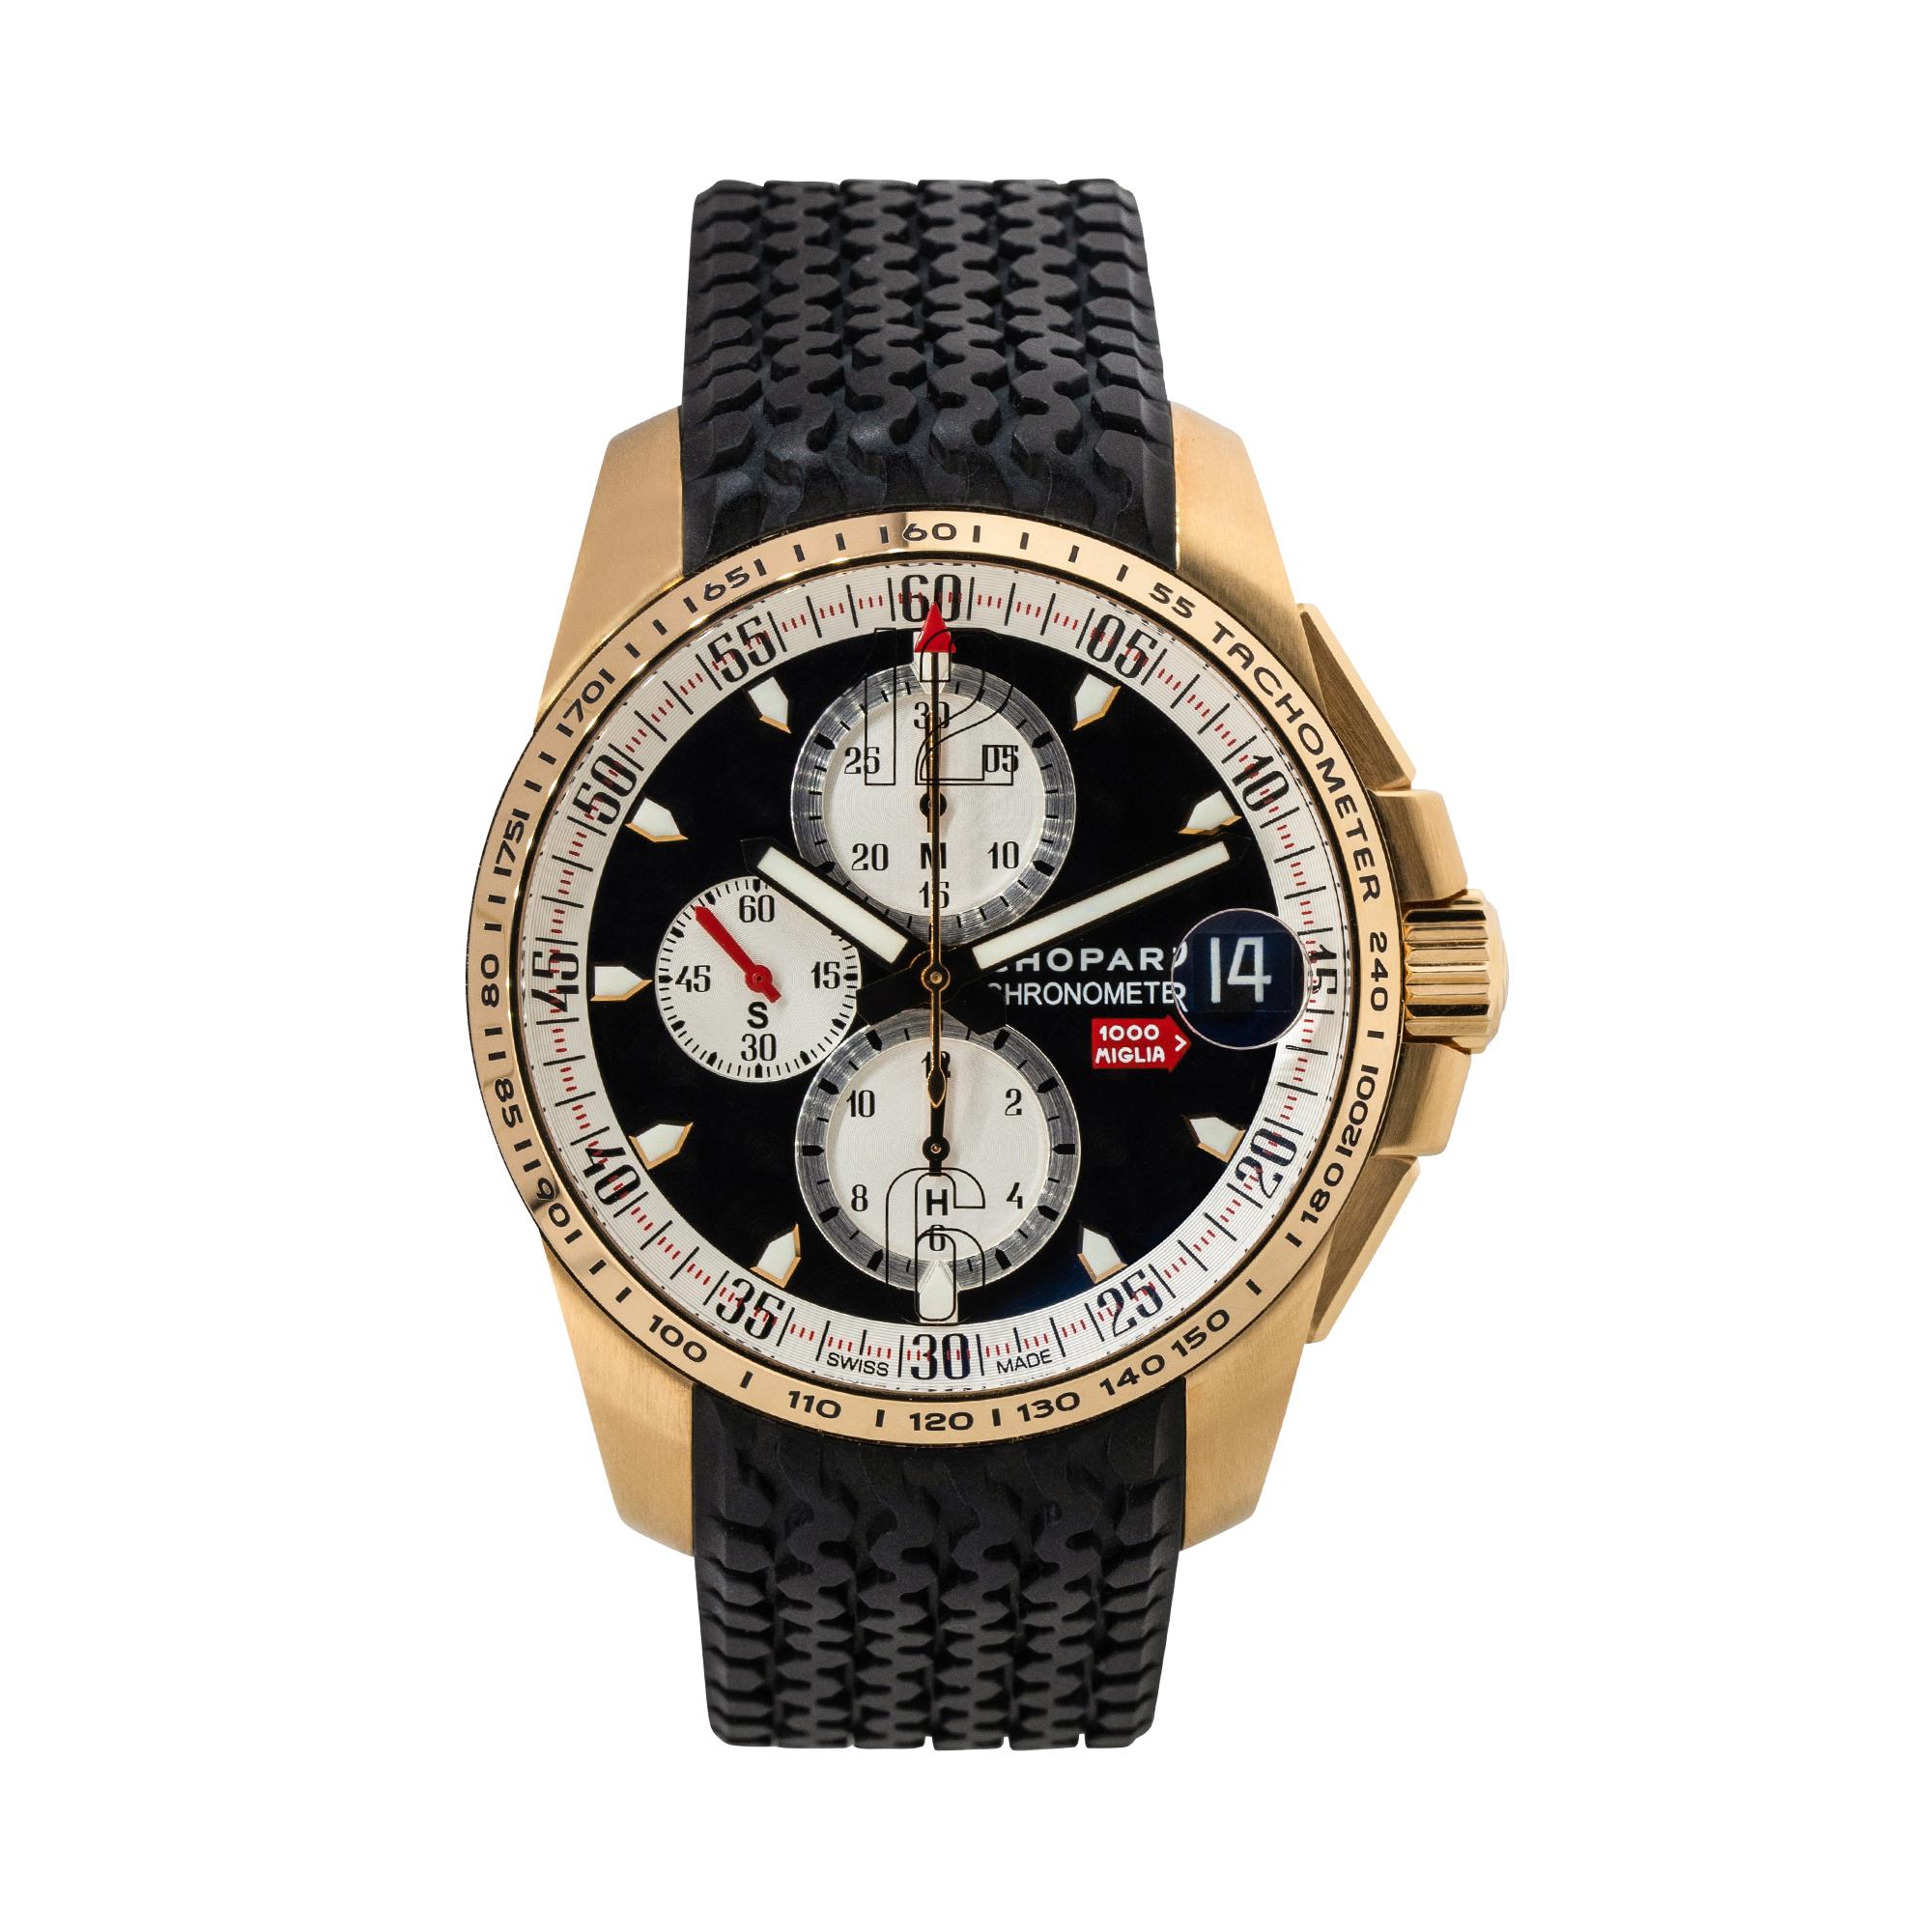 Company: Chopard
Model: Mille Miglia GT XL
Case Material: 18k Rose Gold
Case Diameter: 44mm
Size: Will Fit an 7.5